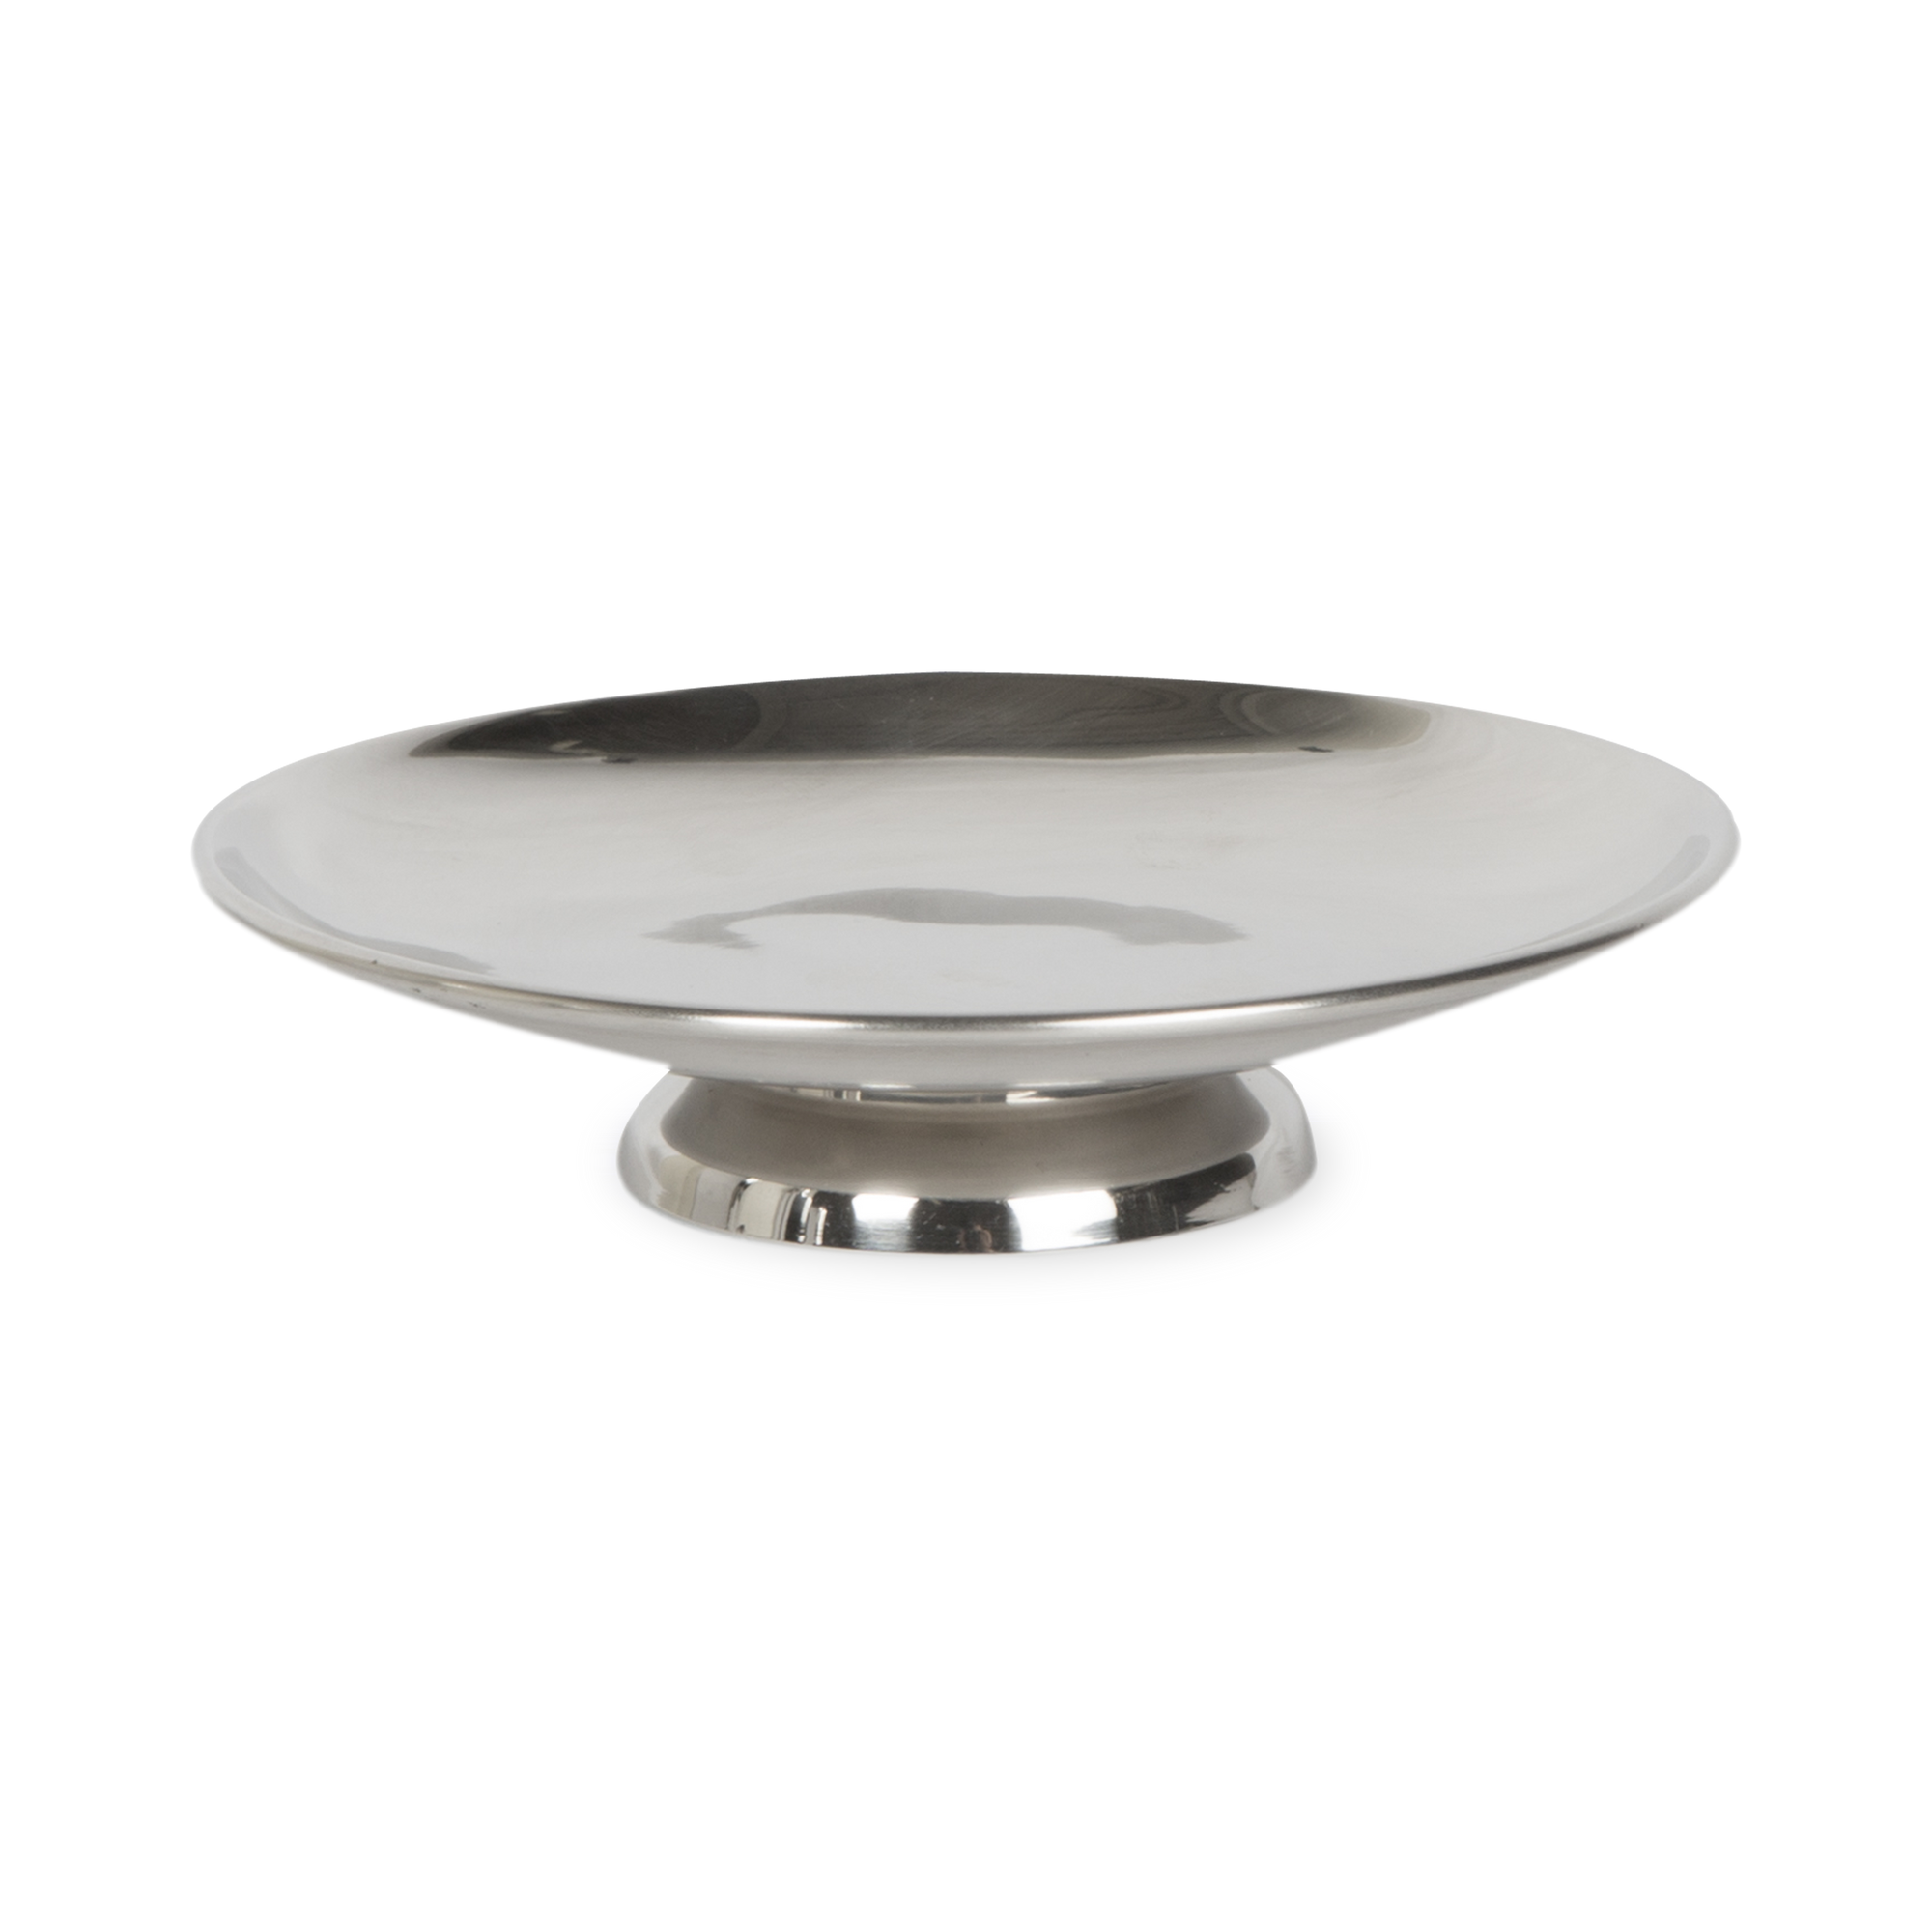 Cast of thickly plated stainless steel, the Arlington collection features clean lines with an elegantly pleated detail.